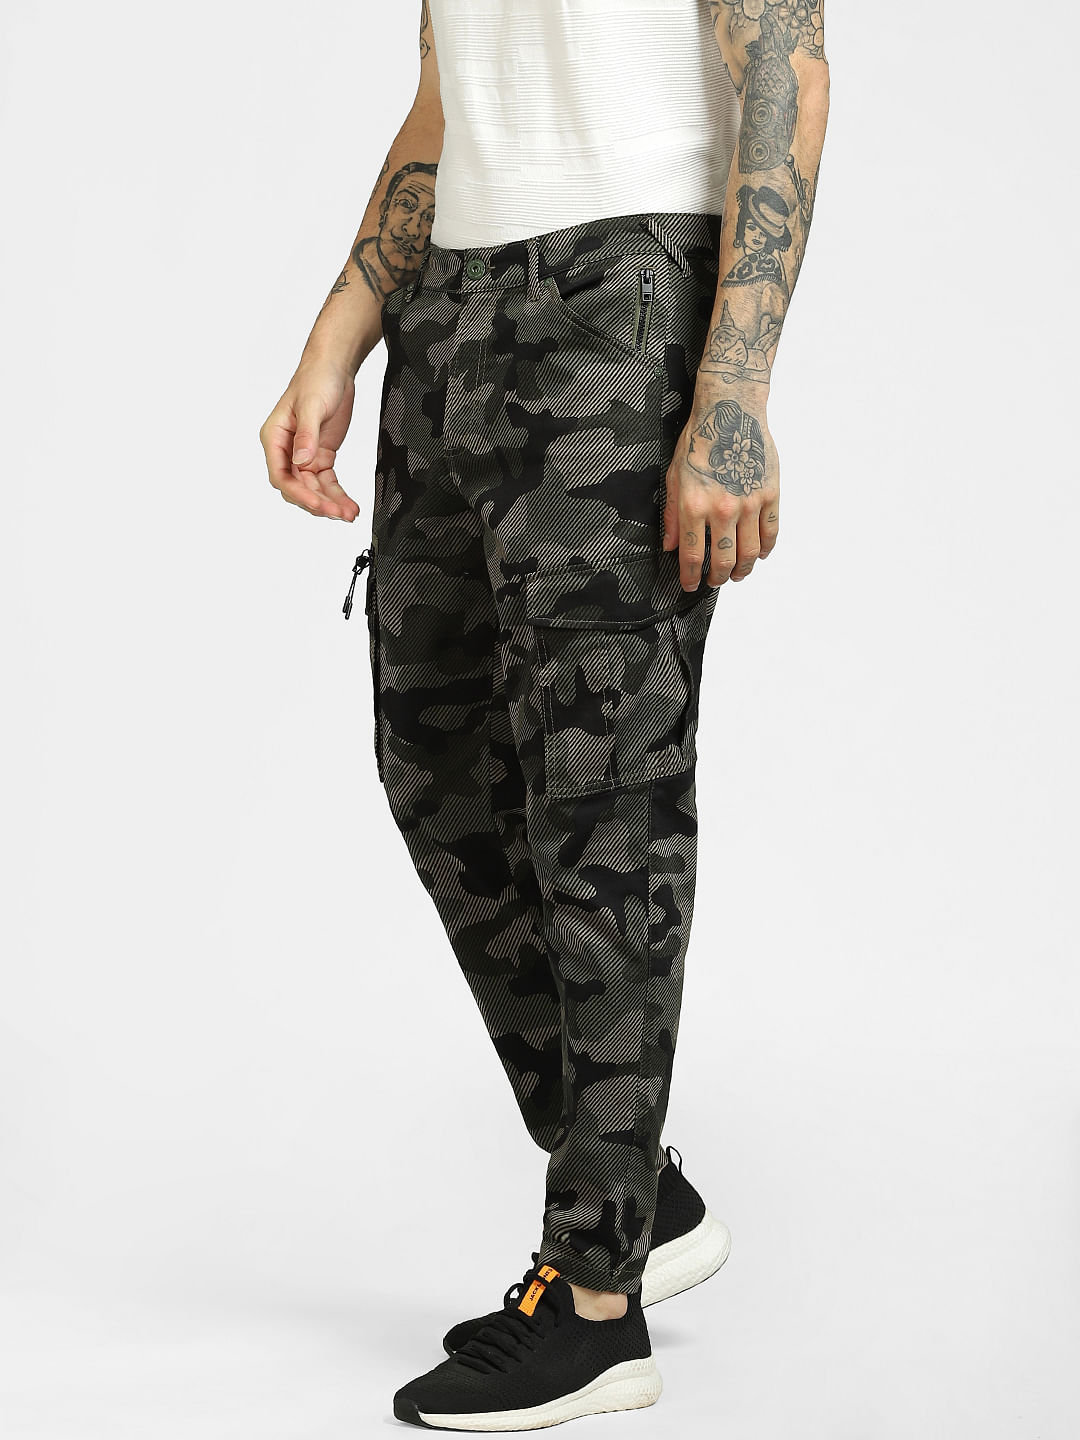 Mens Summer Games Cargo Pants in Camouflage Size 42 by Fashion Nova | Pants  outfit men, Camouflage pants outfit men, Camo cargo pants